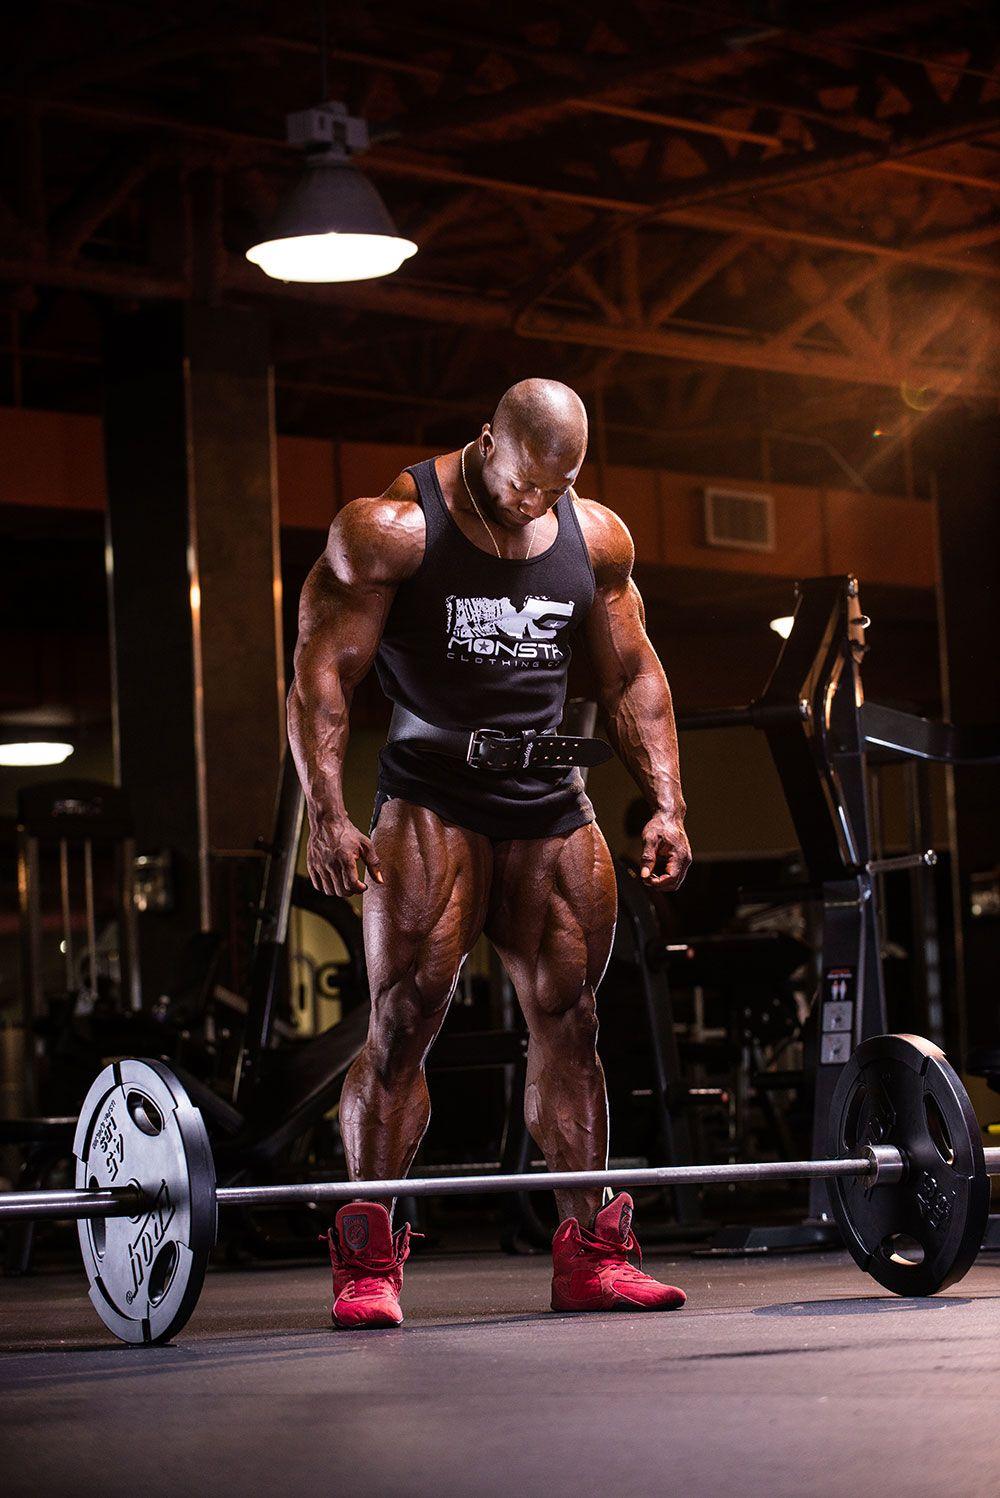 Shawn Rhoden: Strategies for winning the Olympia. Flexatron wants to